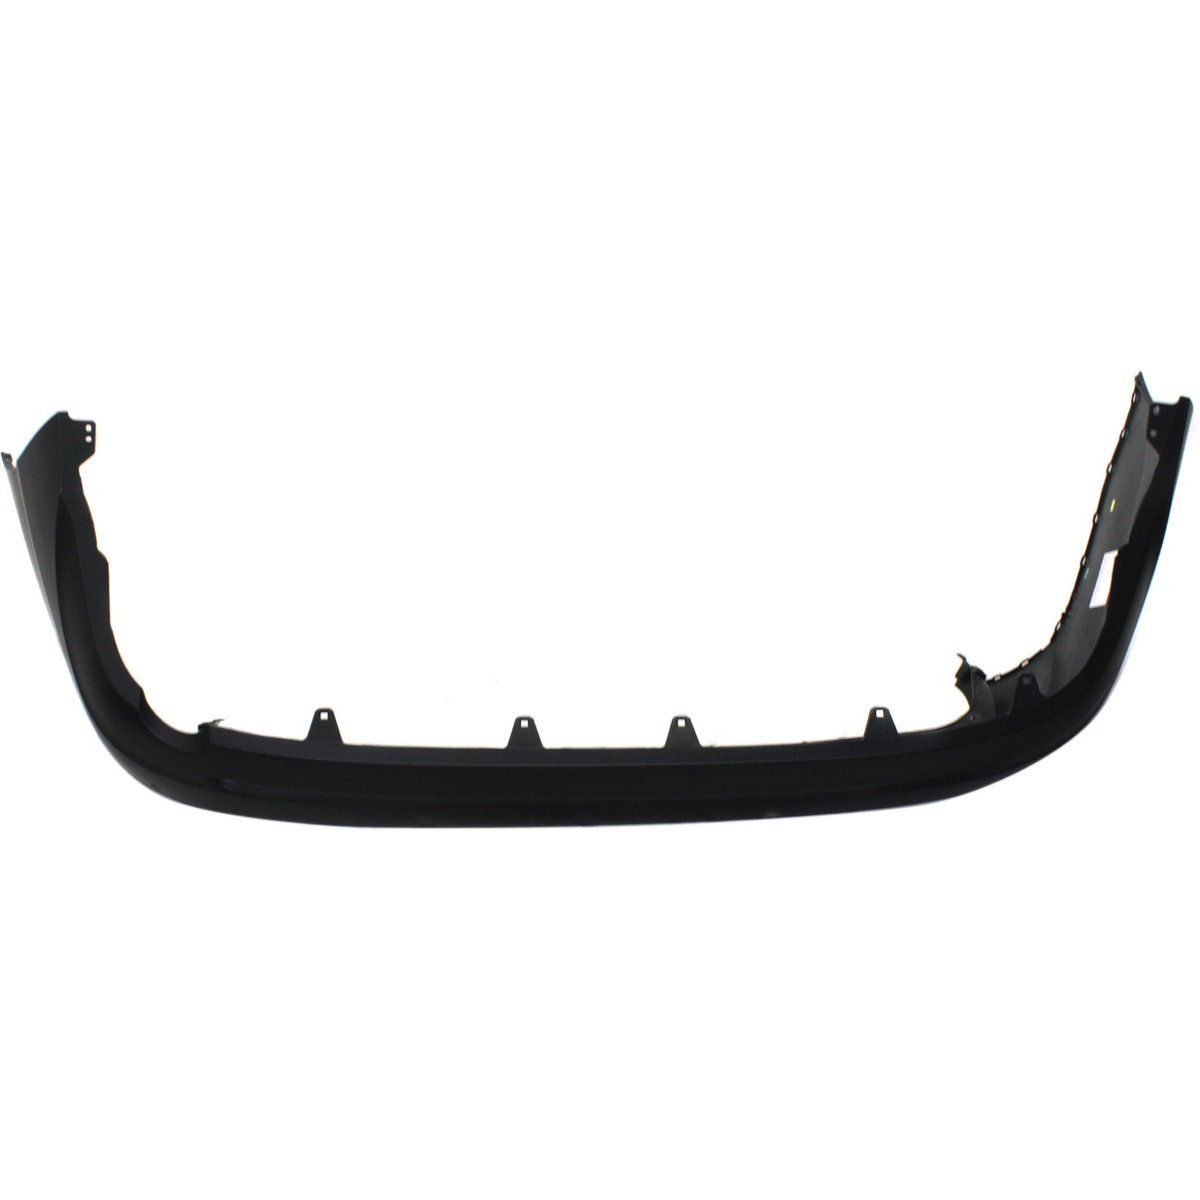 2011-2015 TOYOTA SIENNA Rear Bumper Cover BASE|LE|XLE|LIMITED  w/Park Distance Sensors Painted to Match